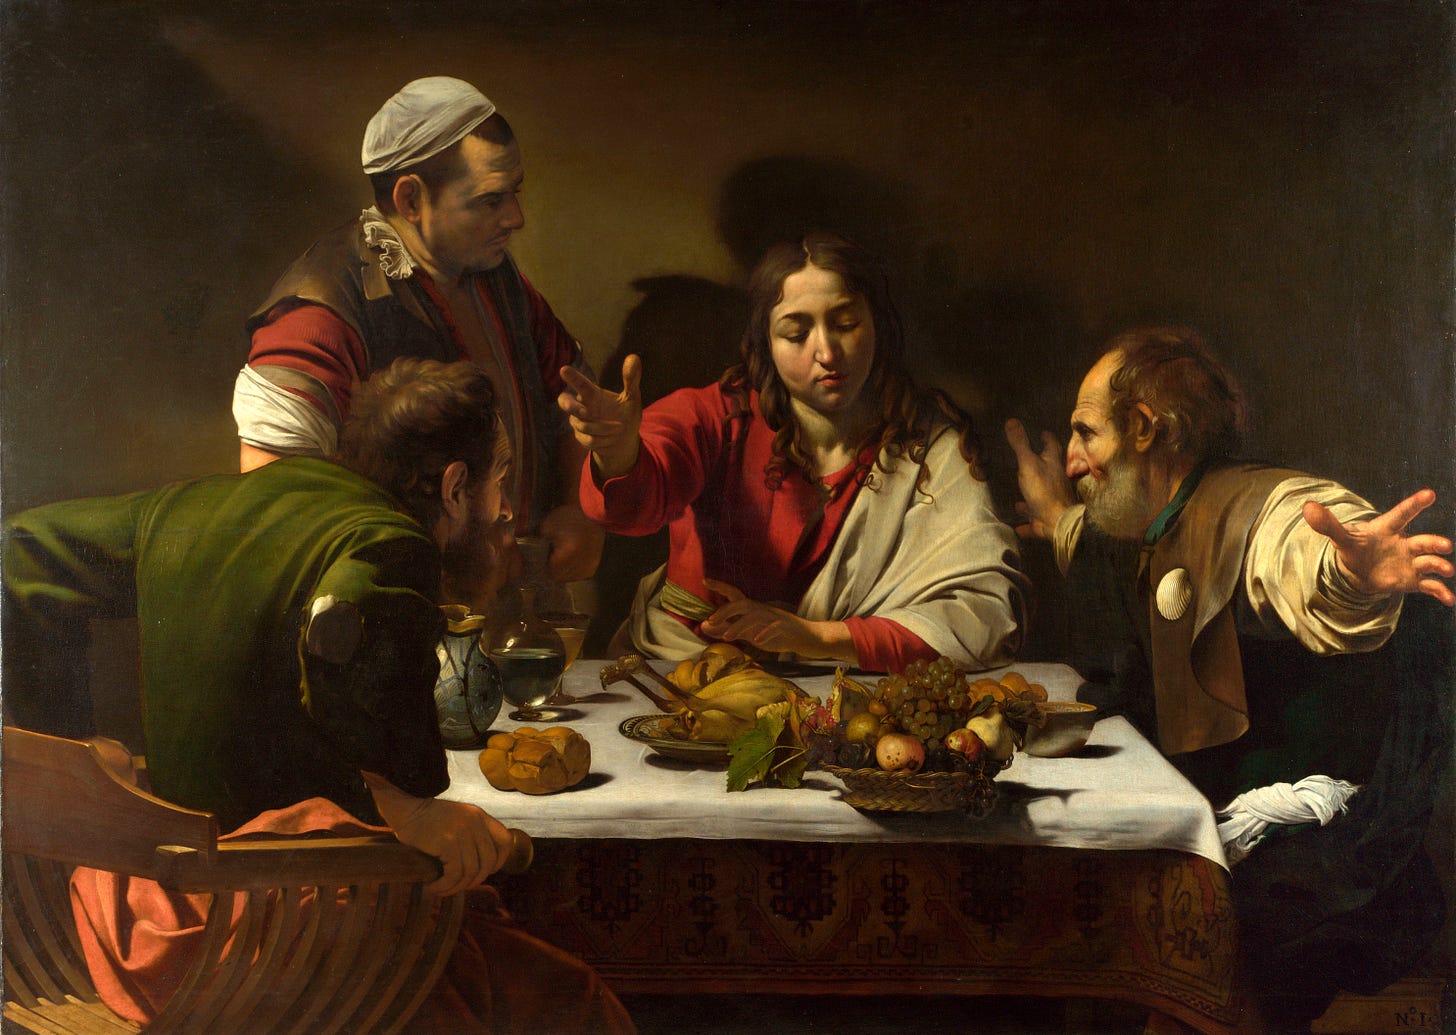 https://upload.wikimedia.org/wikipedia/commons/4/4d/1602-3_Caravaggio%2CSupper_at_Emmaus_National_Gallery%2C_London.jpg